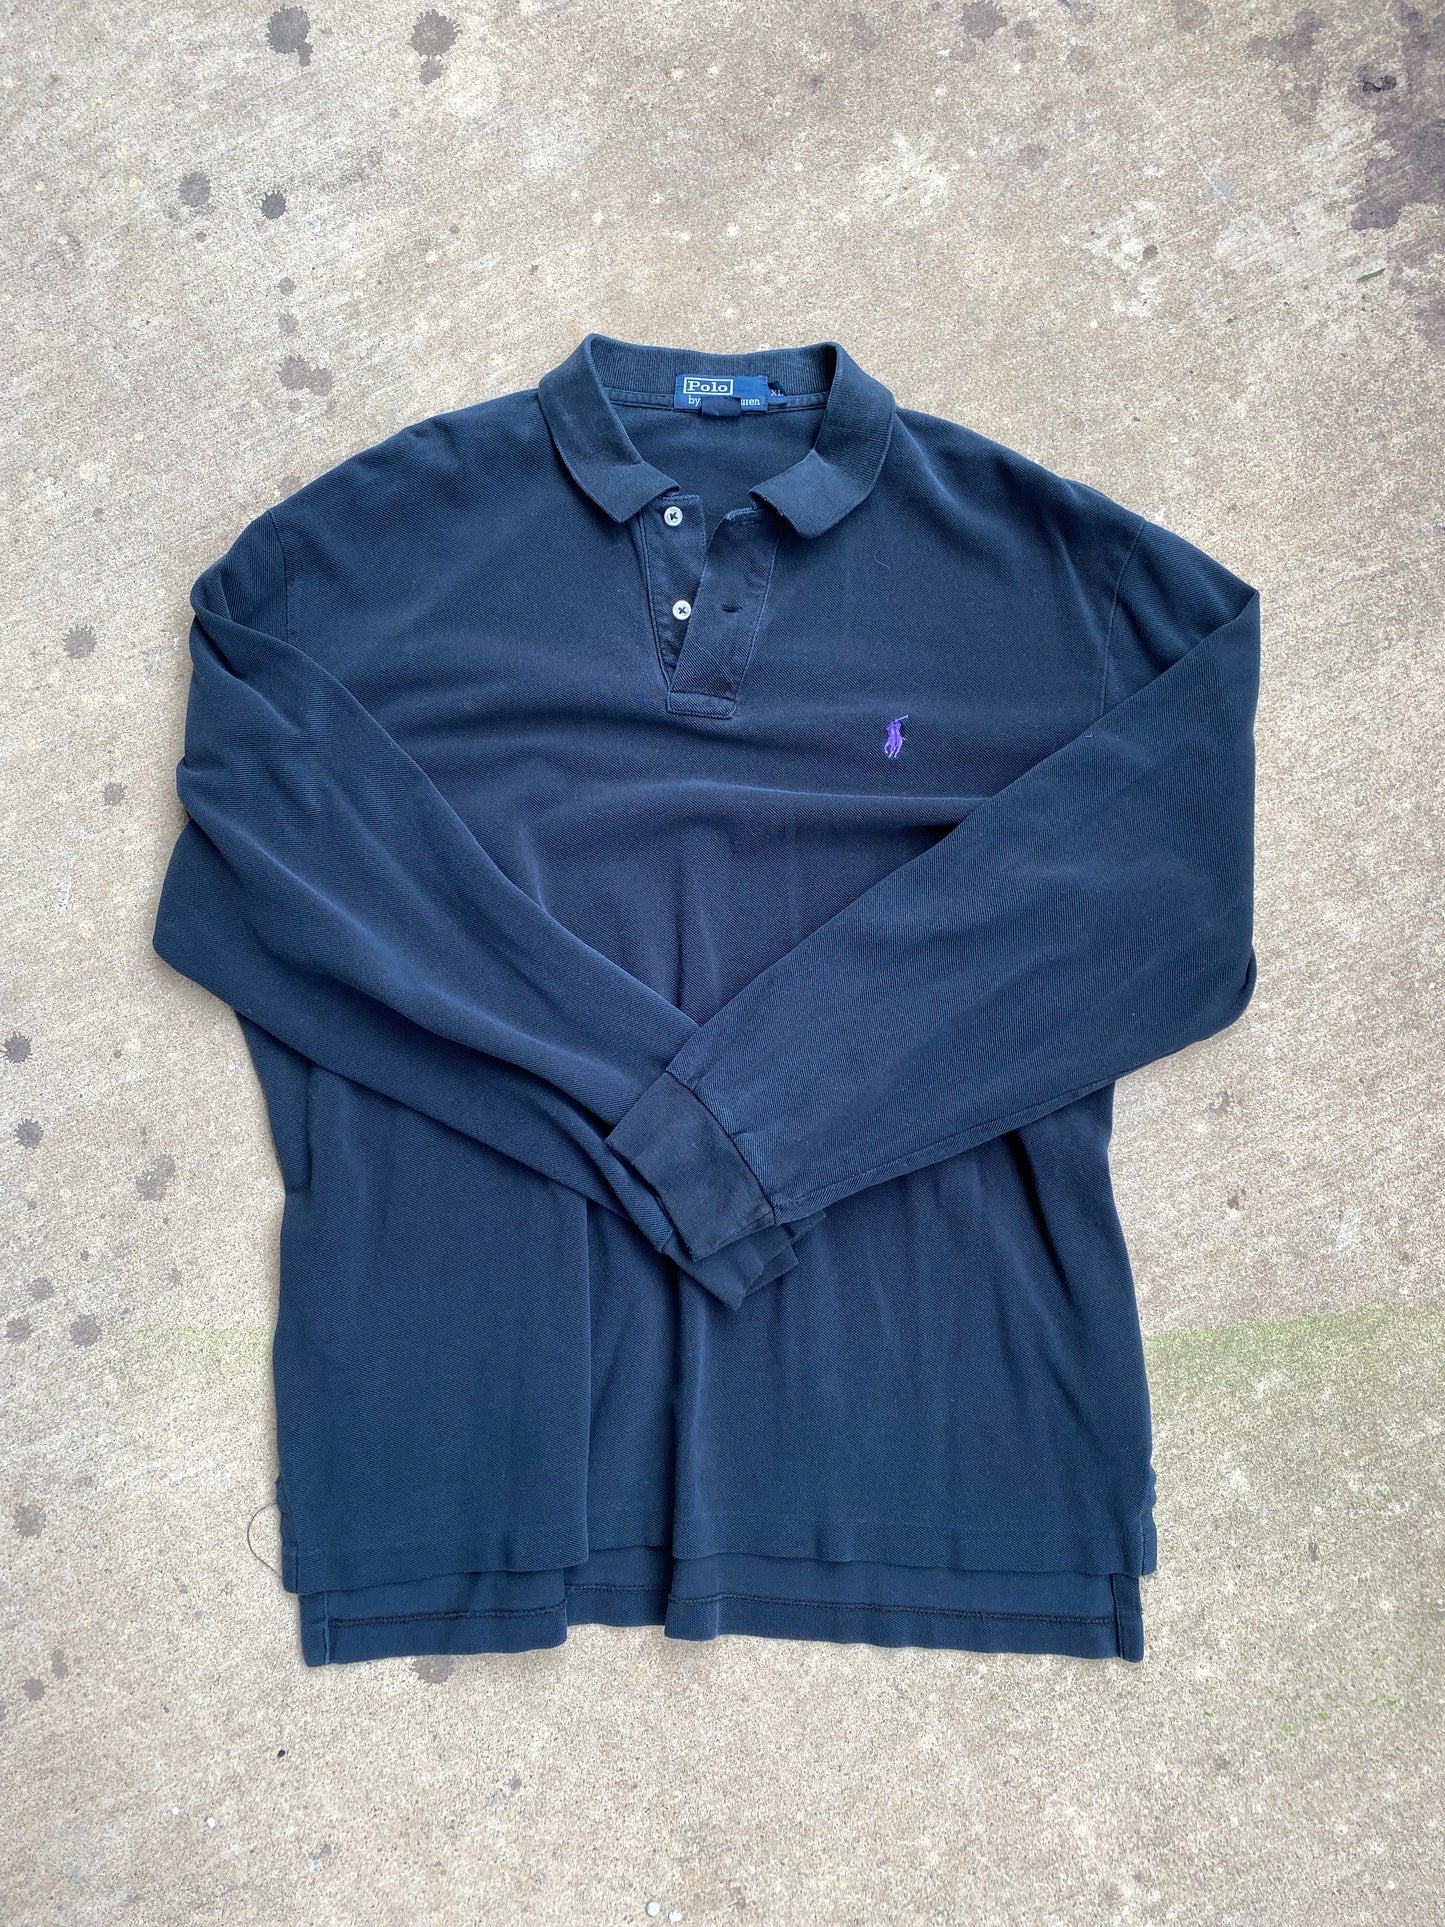 Polo Ralph Lauren Black and Purple Longsleeve Polo - Brimm Archive Wardrobe Research